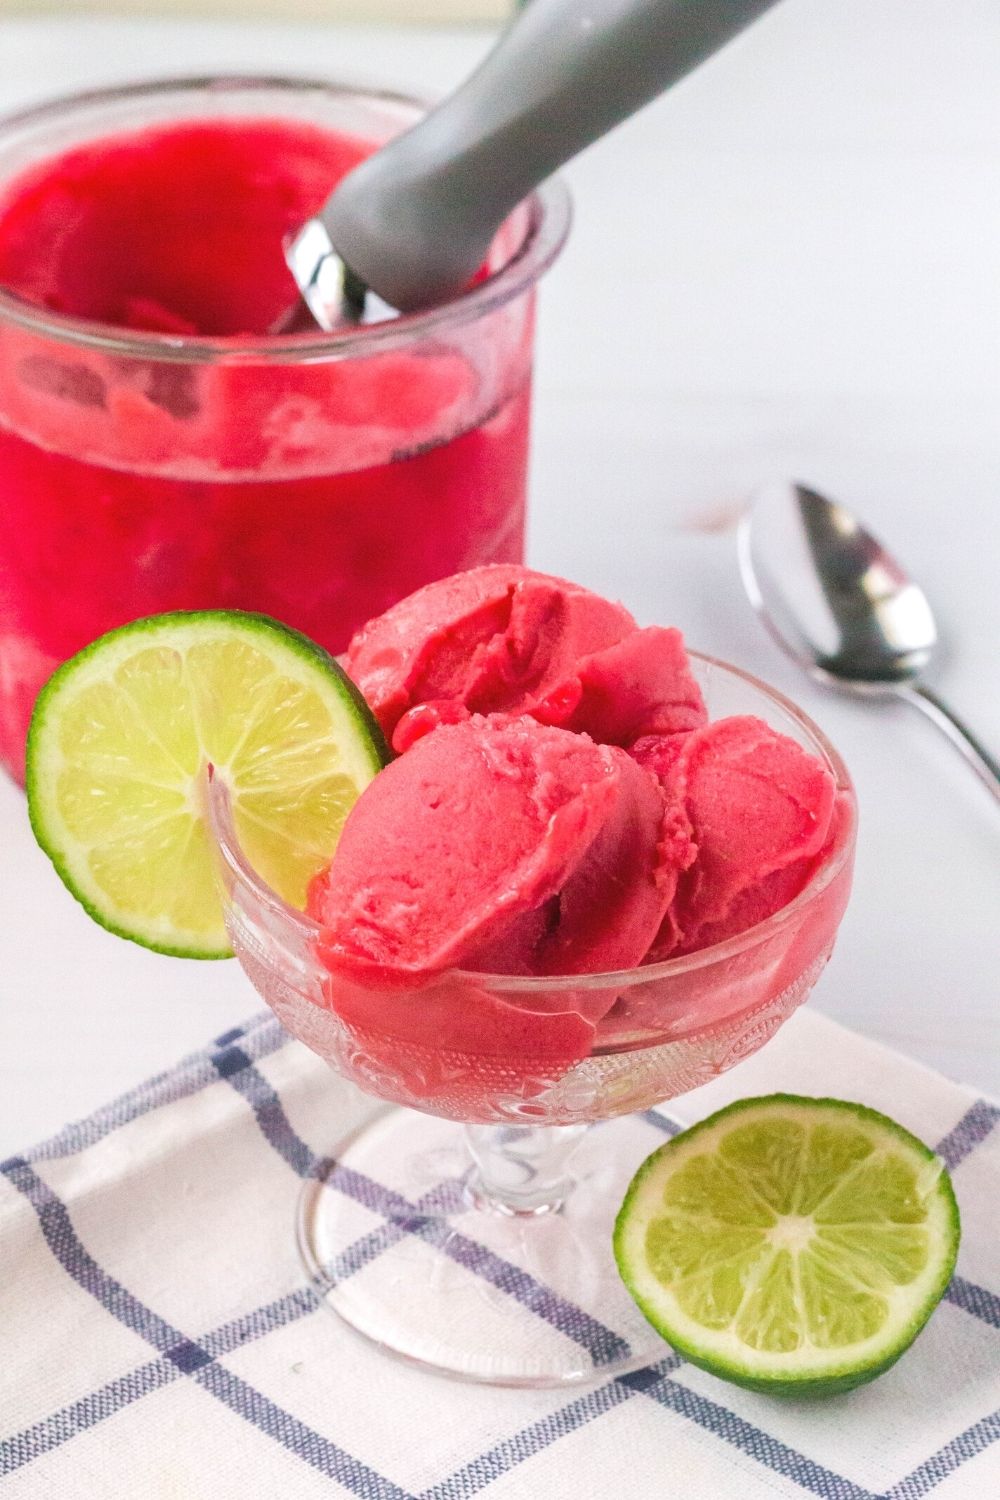 A glass dessert cup serving scoops of Ninja Creami cherry limeade sorbet is in the foreground; and a Ninja Creami pint of the remaining sorbet is in the background.